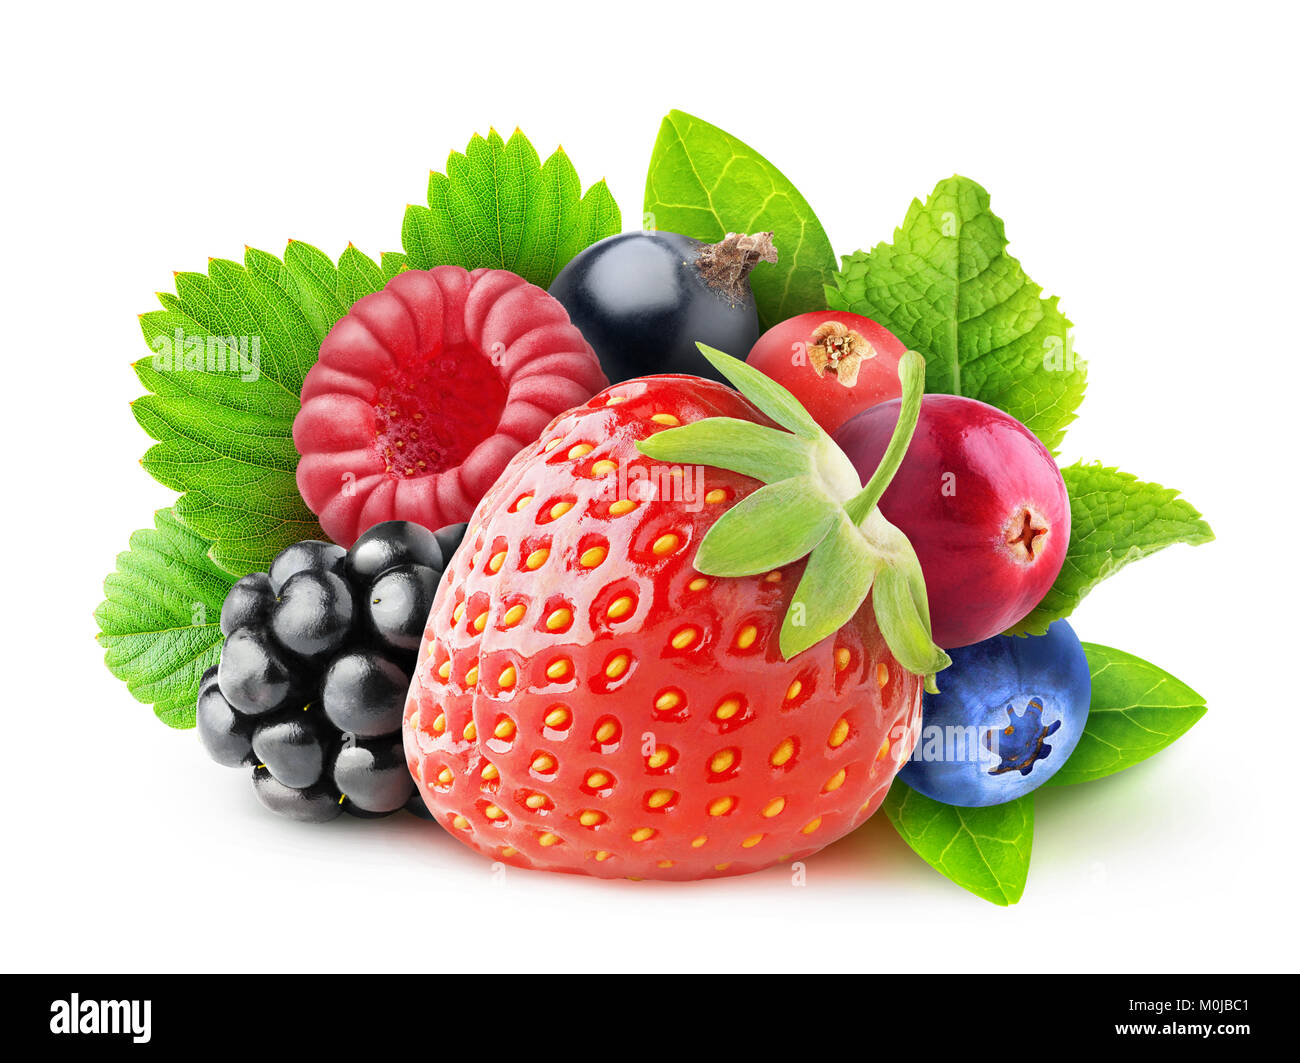 Isolated fresh berries. Pile of strawberry, blackberry, raspberry, black and red currant, cranberry and blueberry fruits with leaves isolated on white Stock Photo